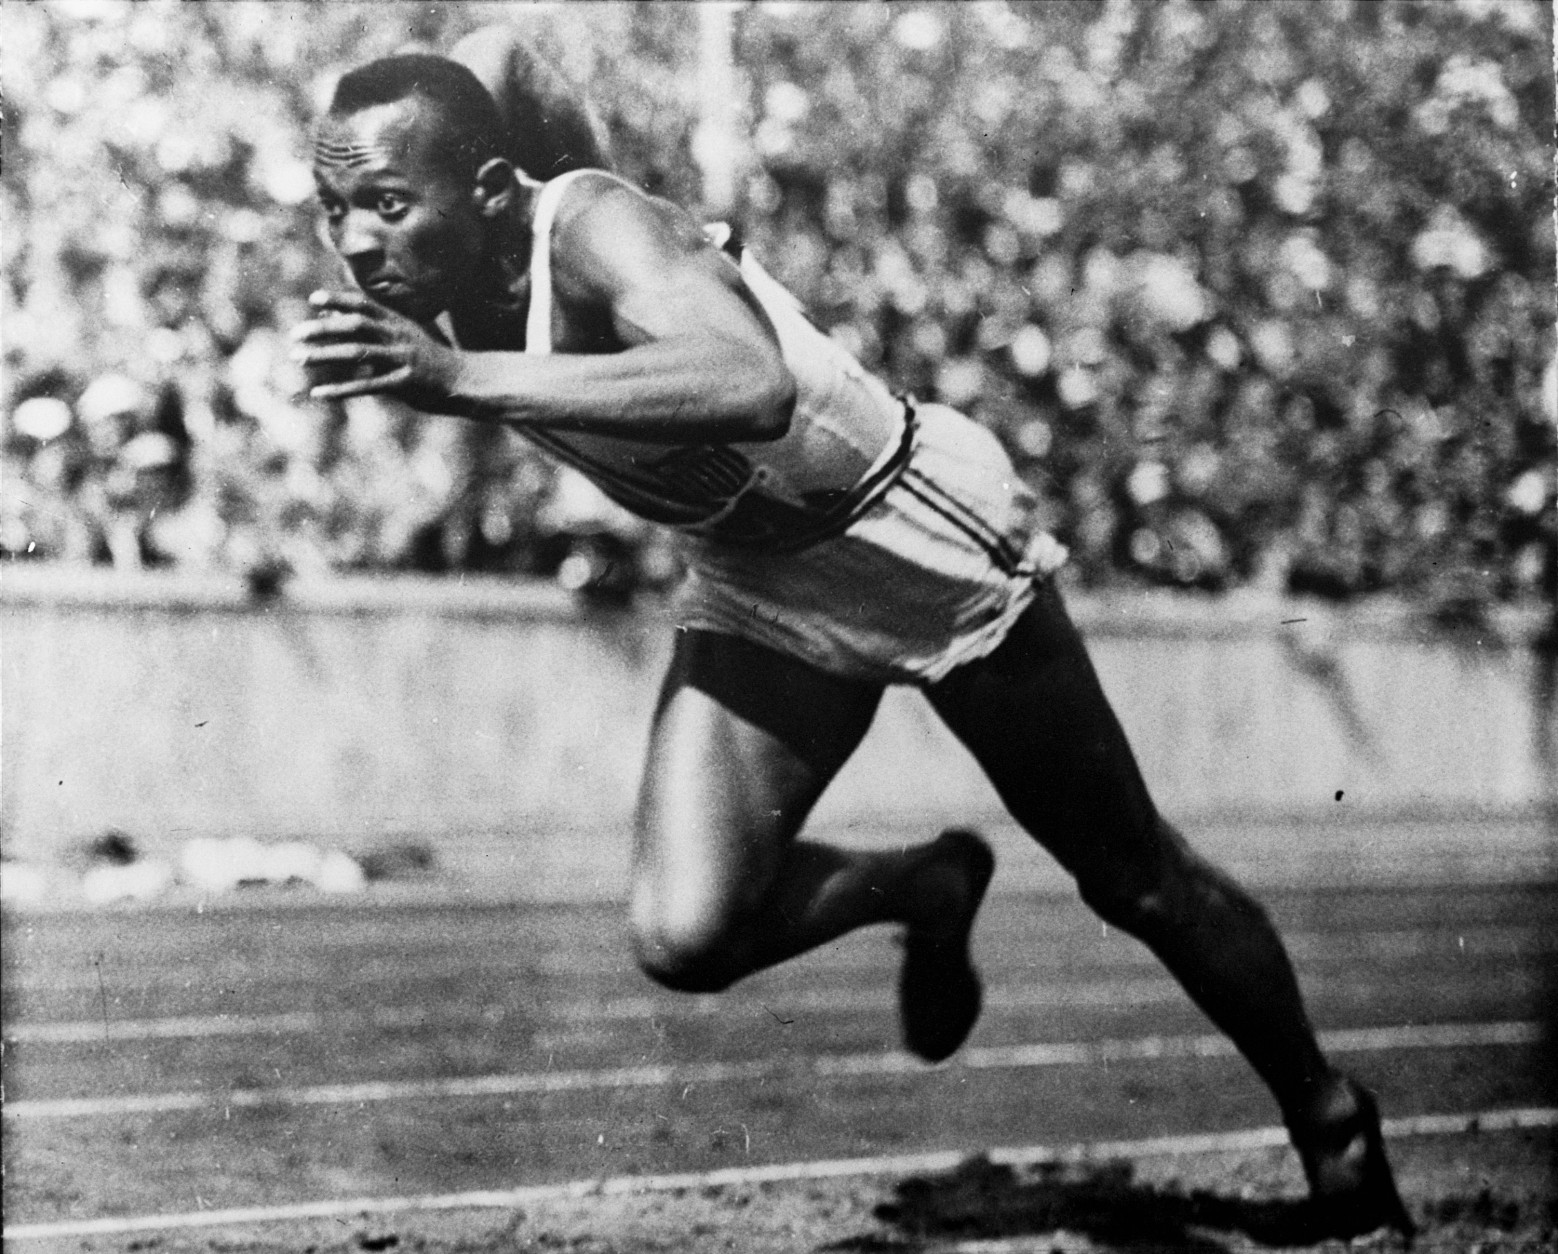 FILE - In this 1936 file photo, Jesse Owens of the United States runs in a 200-meter preliminary heat at the 1936 Summer Olympics in Berlin. Owens won four gold medals at the 1936 Berlin Olympics and showed up Adolph Hitler's idea of Aryan supremacy. The Olympic games are supposed to rise above political interests, but an undertone of politics has been present at every Olympics going back at least to the 1936 games. (AP Photo/File)